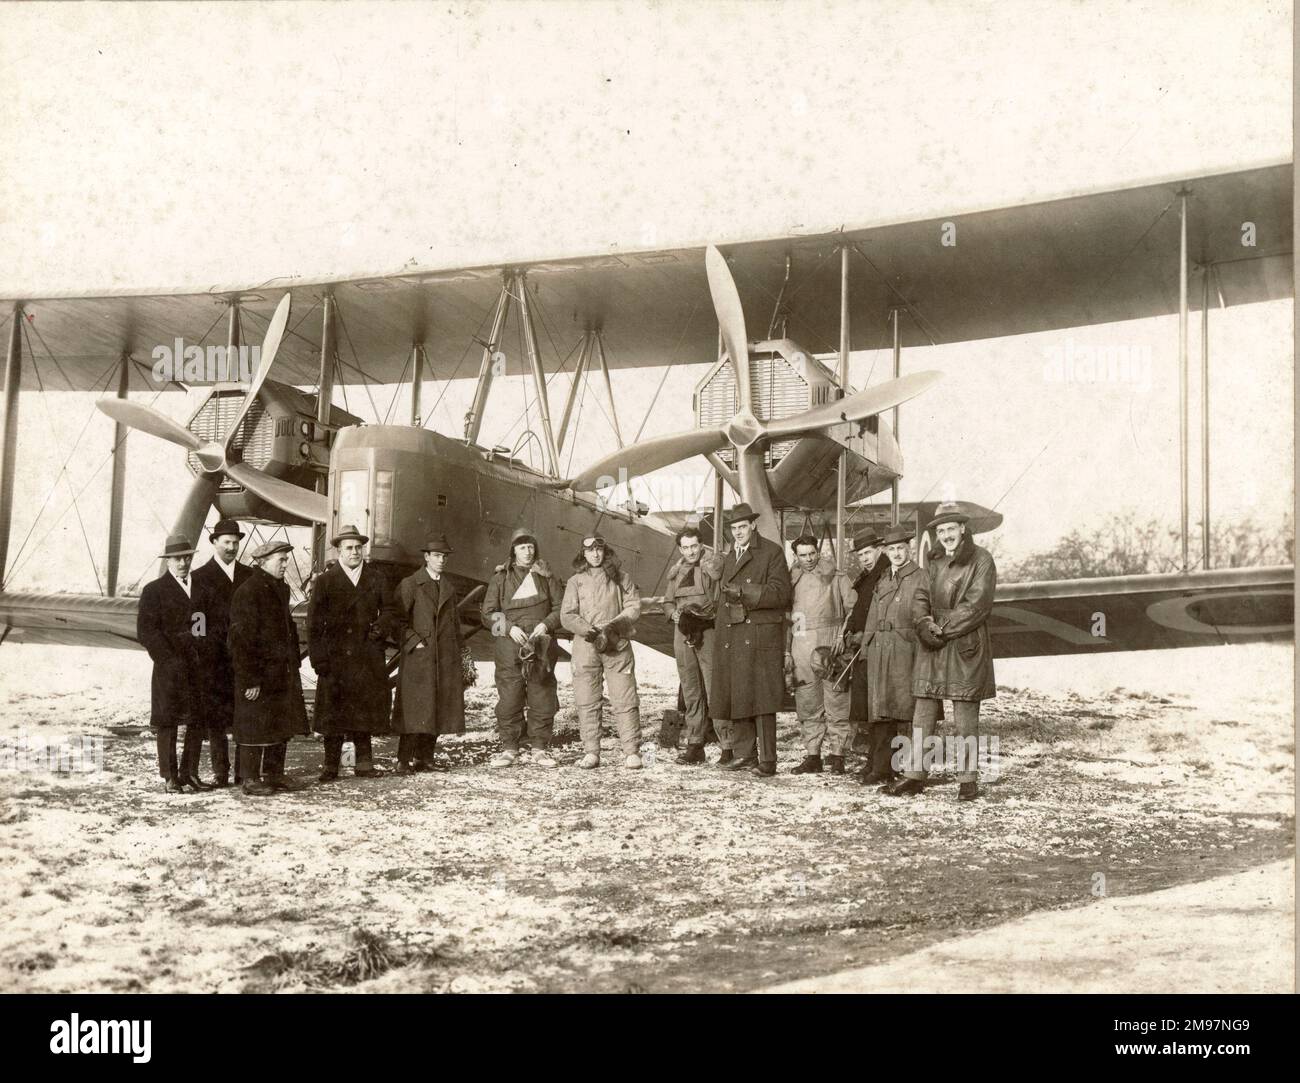 The start of the England to Australia flight from Hounslow Aerodrome, London, 12 November 1919. In flying clothing (from left) Ross Smith, Keith Smith, Sergeant J.M. (Jim) Bennett and Sergeant W.M. (Wally) Shiers. Between Sgts Bennett and Shiers is R.K. Pierson who designed the Vimy. Stock Photo